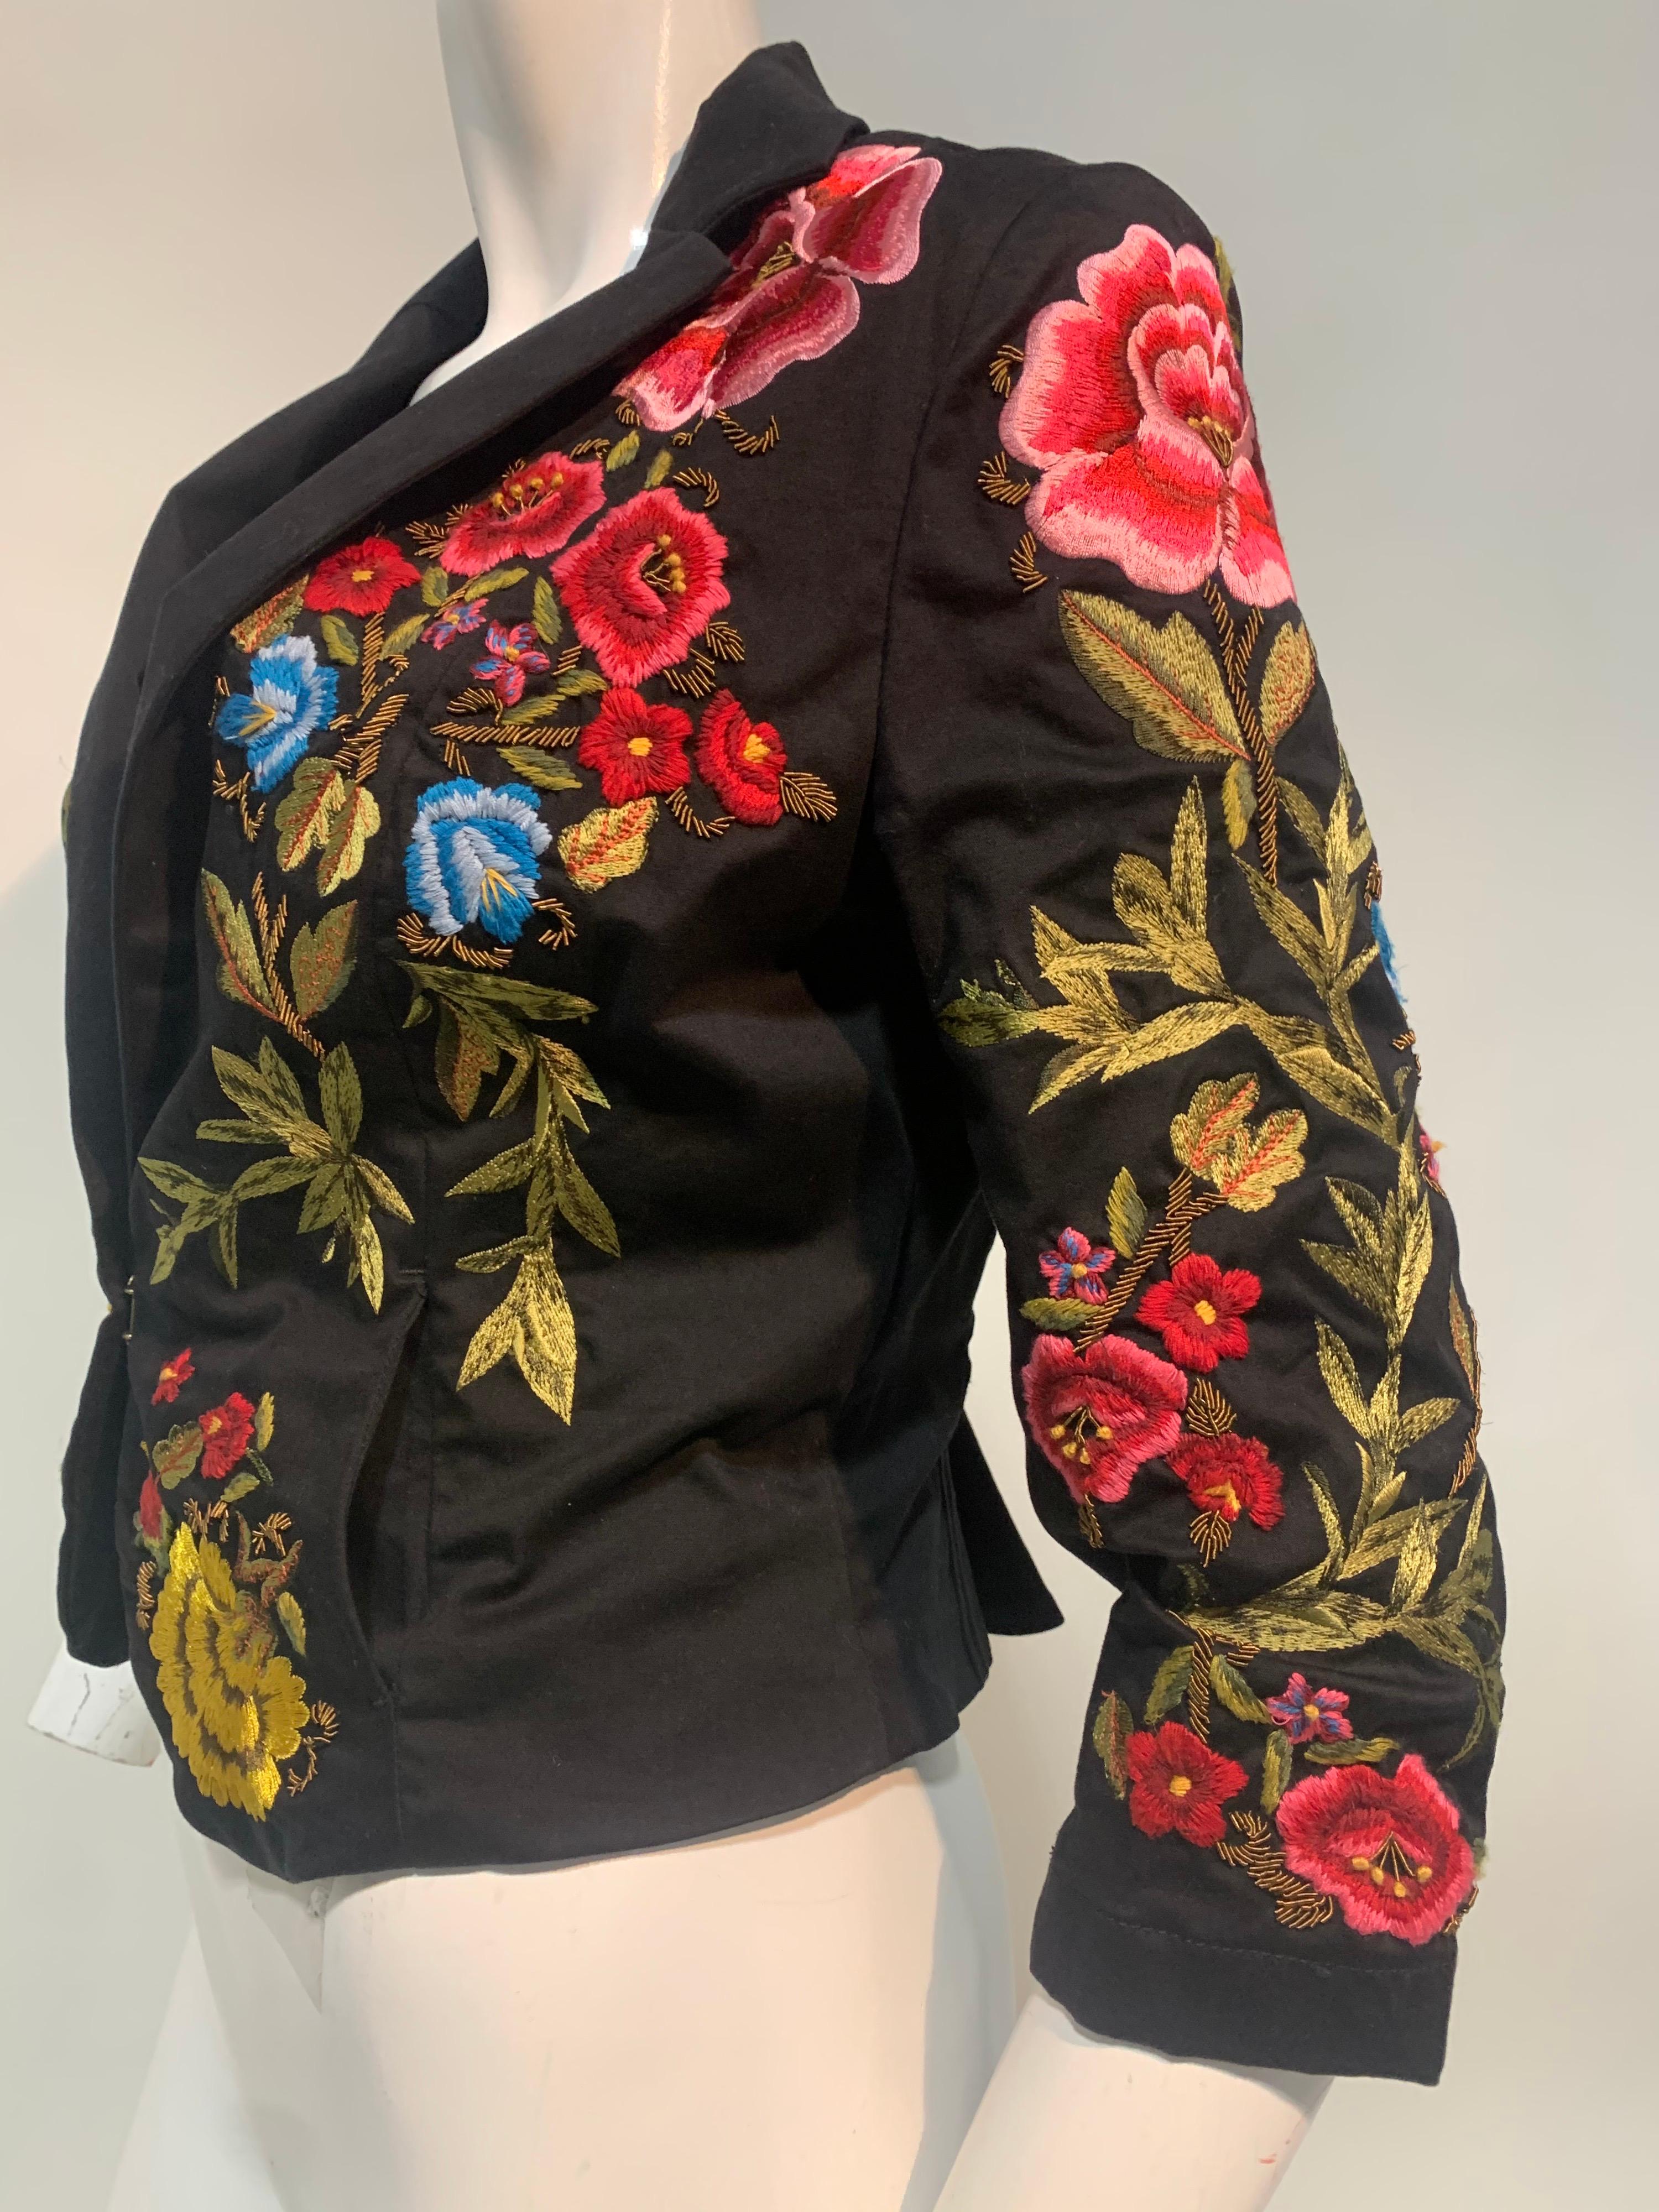 Women's 1990s Christian Lacroix Matador-Inspired Black Satin Jacket w/ Floral Embroidery